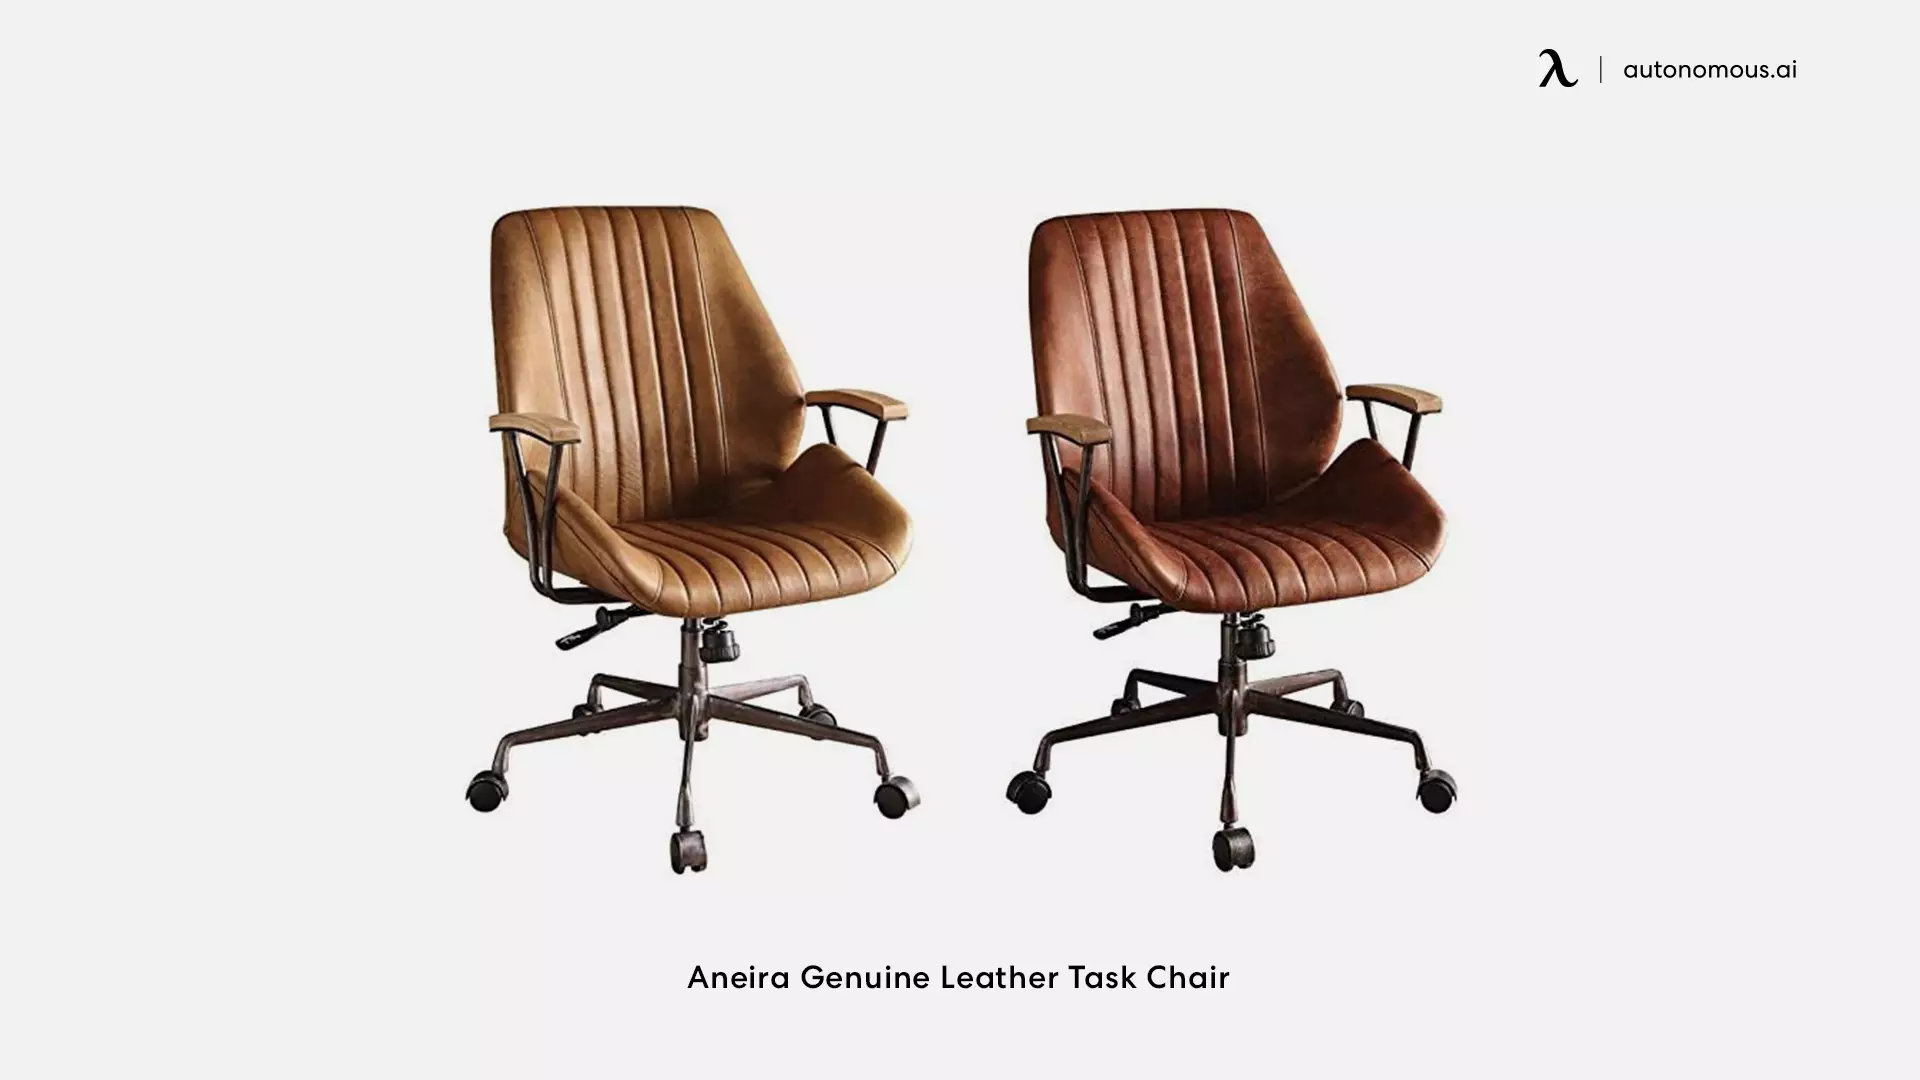 Aneira Genuine Leather Task Chair